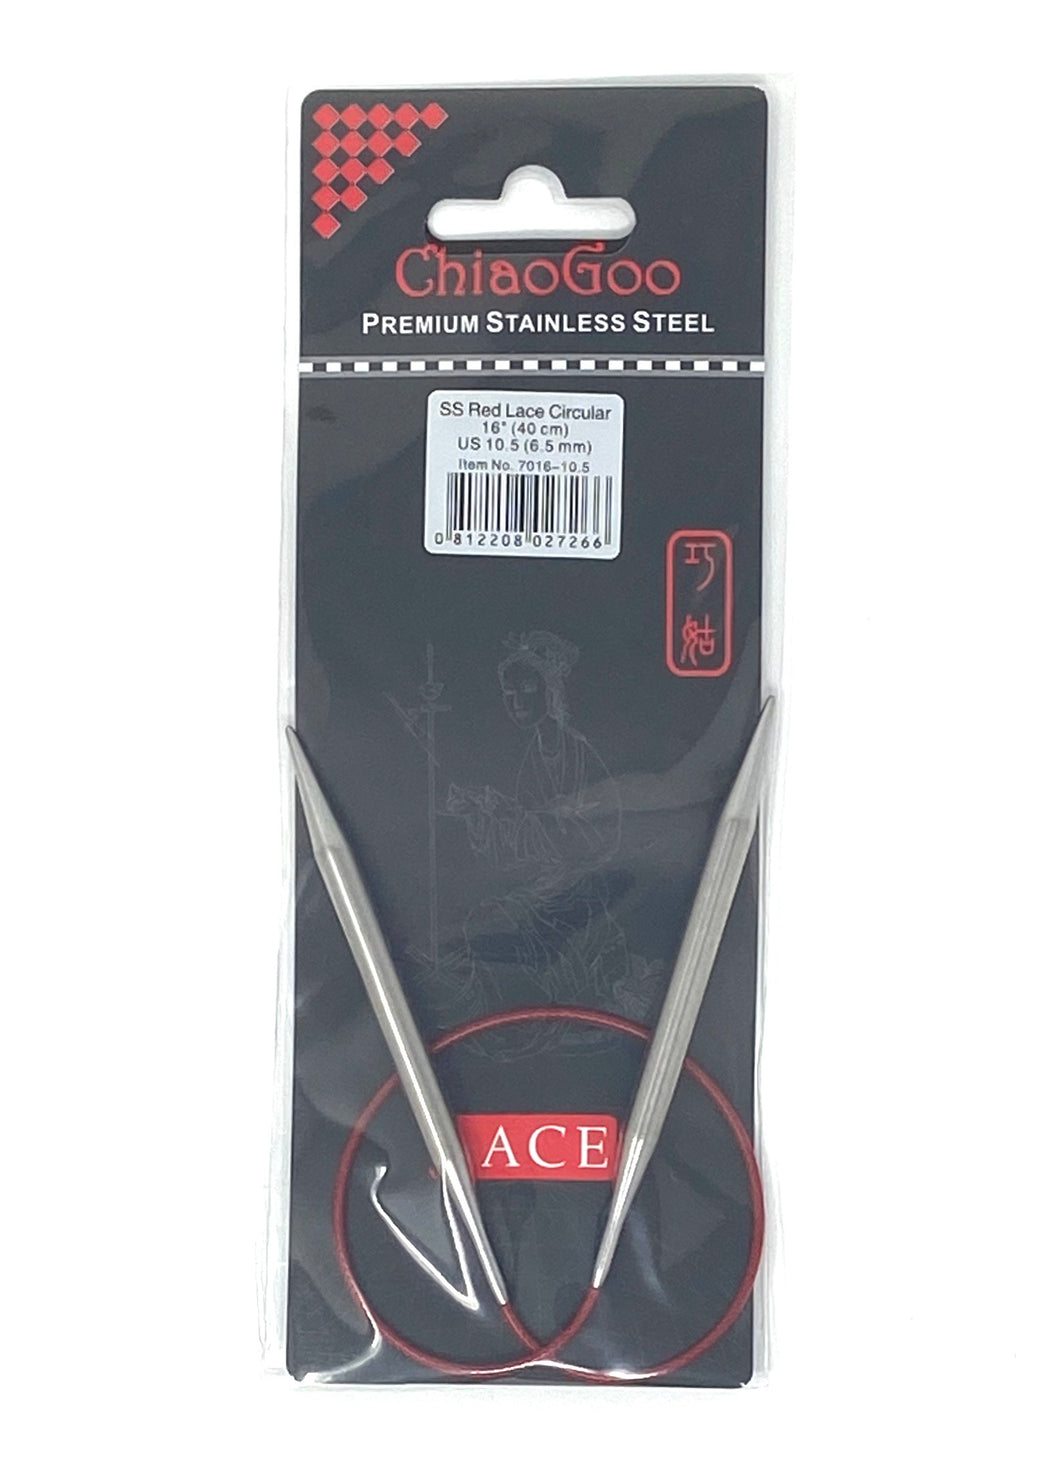 ChiaoGoo Red Lace Circular Needles - US 10.5 - 16 Inches